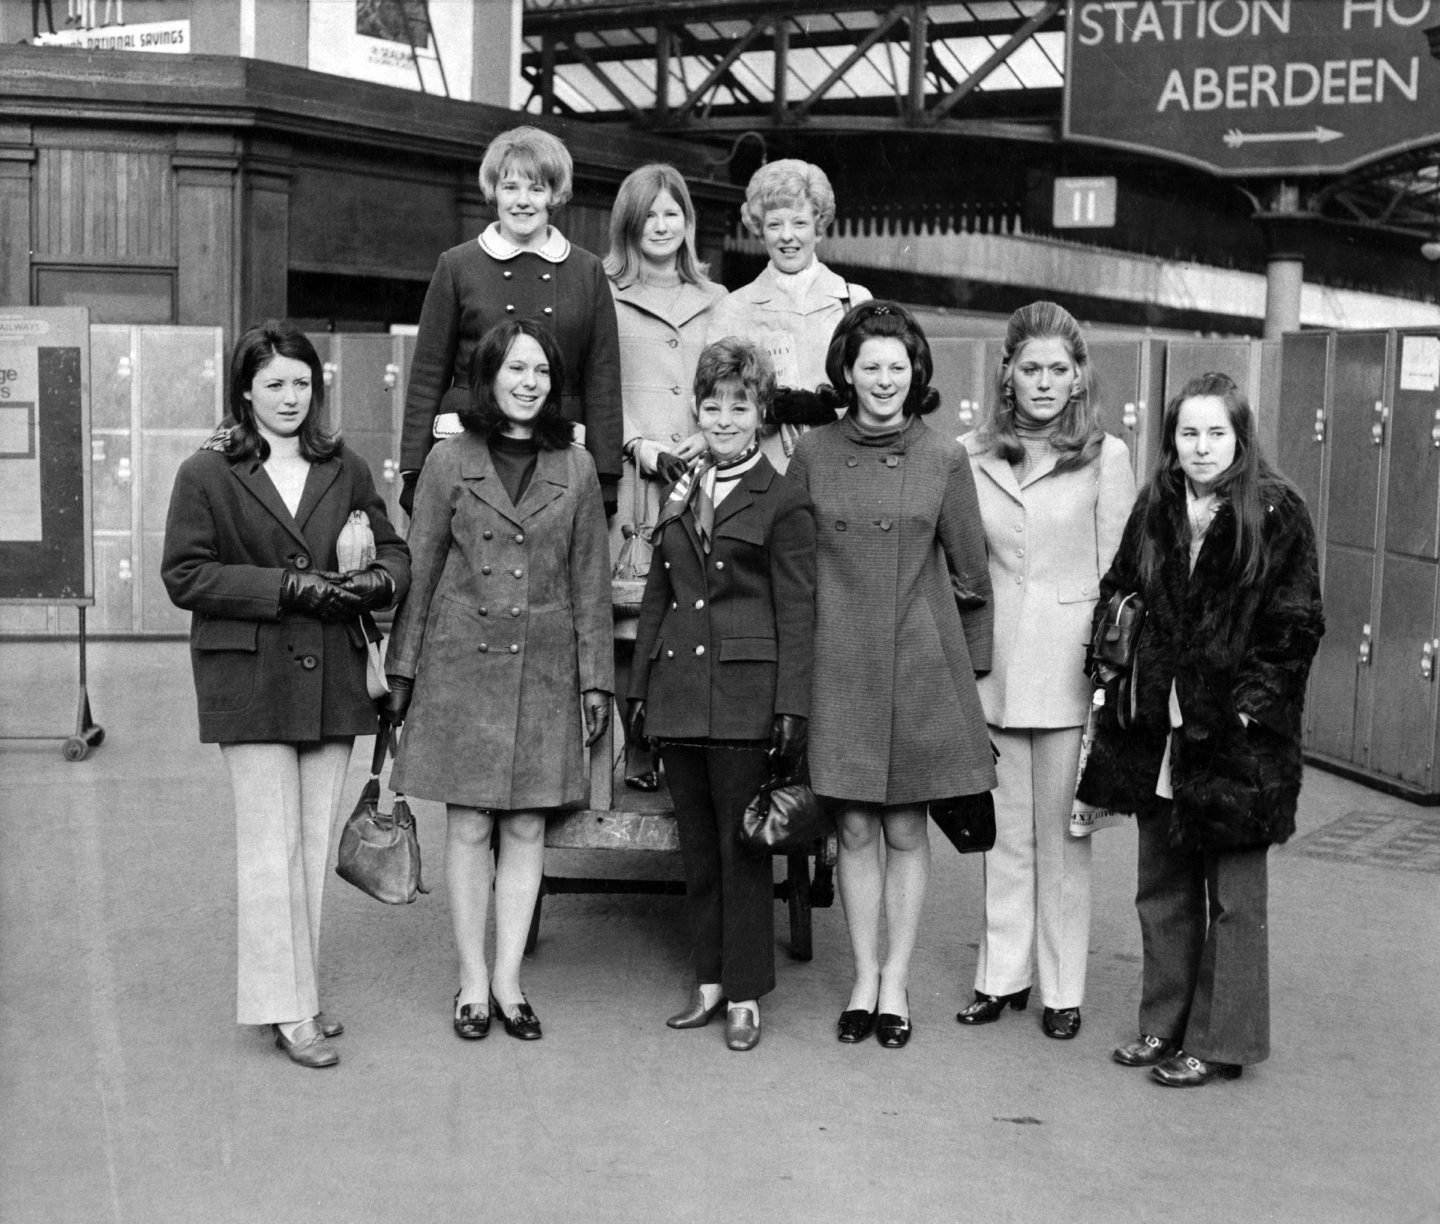 Players' wives and girlfriends at Aberdeen train station, off to the 1970 Scottish Cup Final.